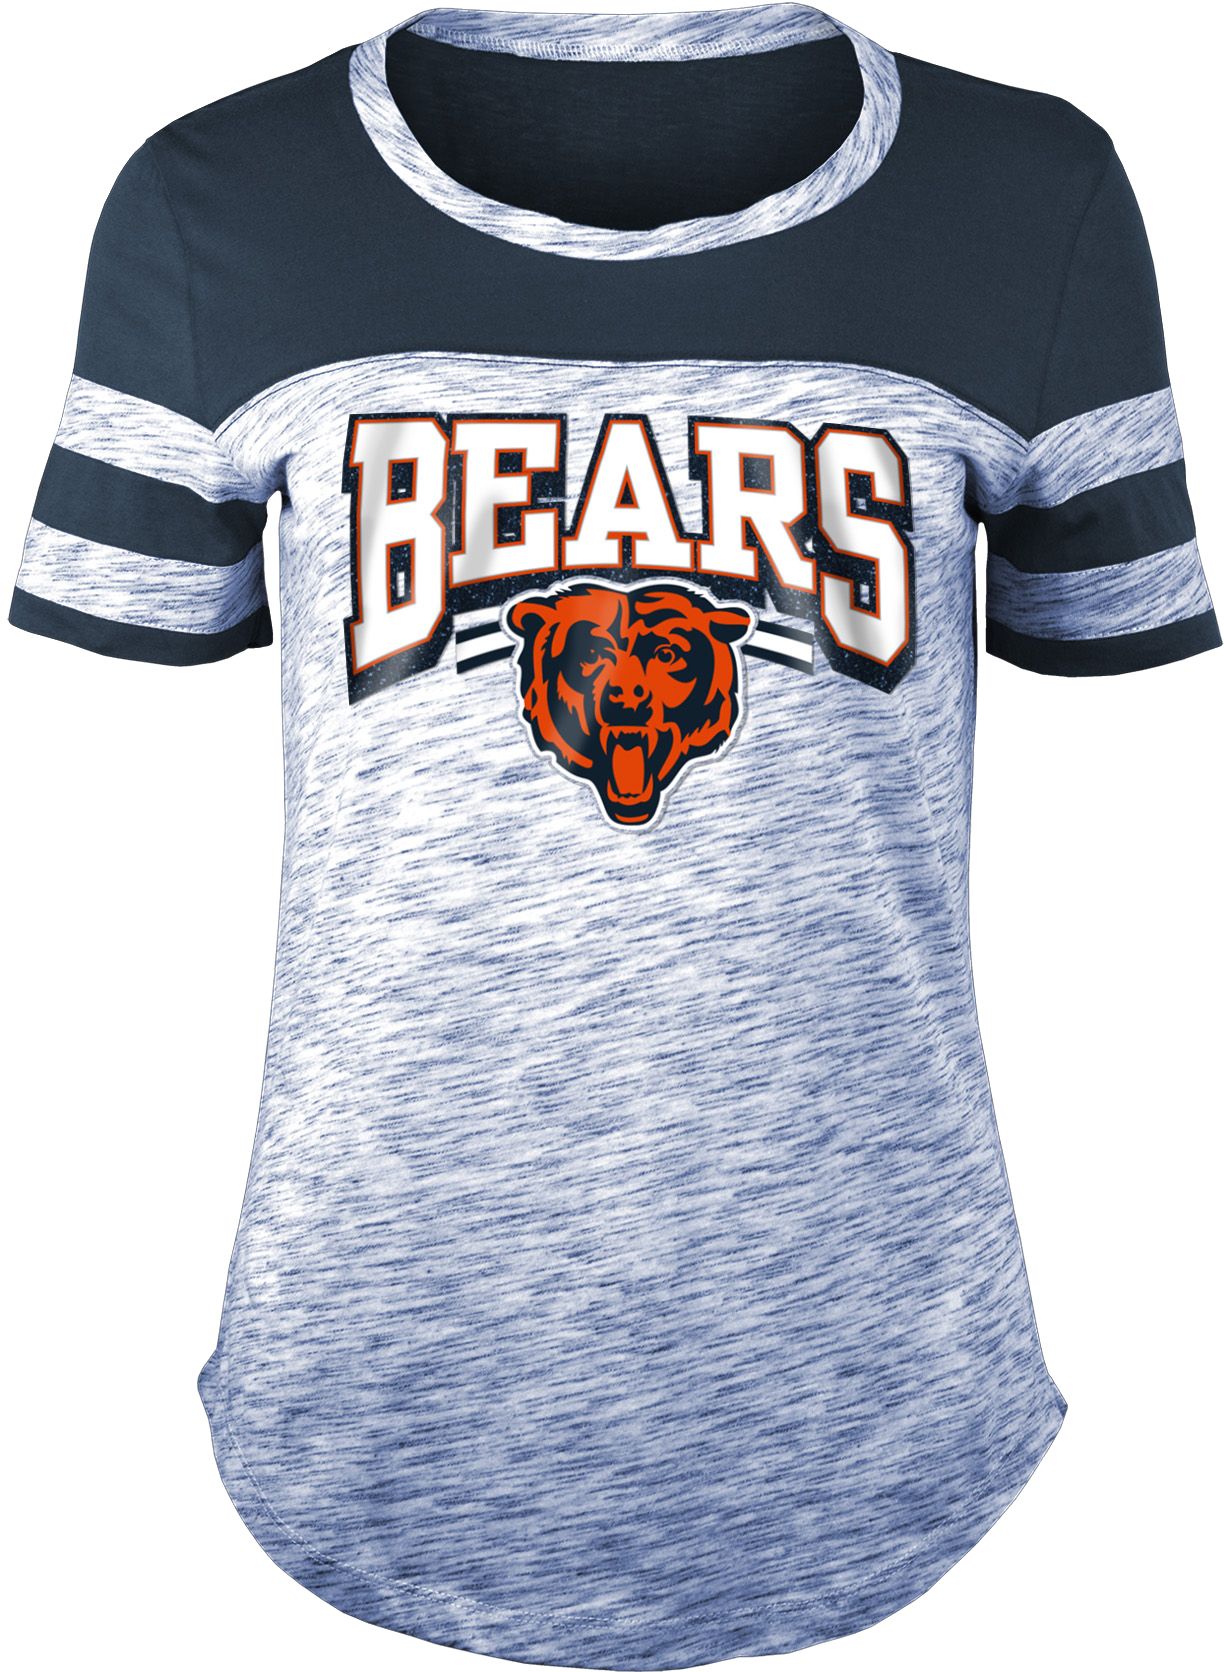 womens vintage chicago bears t shirts